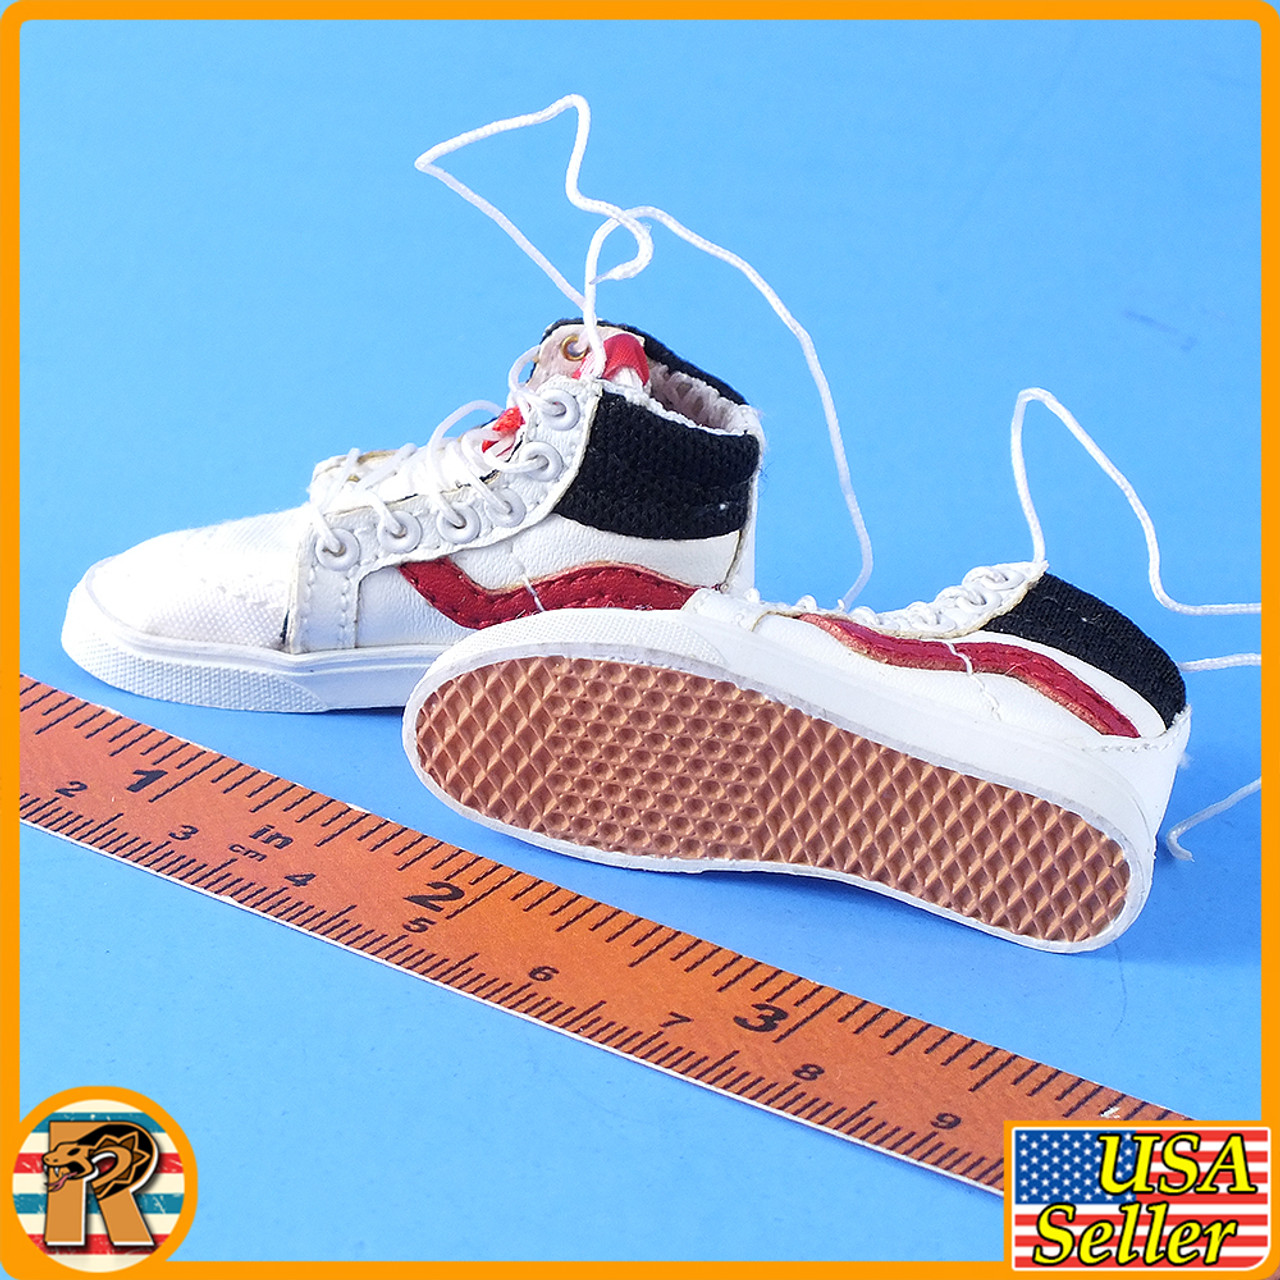 Assaulter Benoaron - Sneakers Shoes (for Feet) - 1/6 Scale -